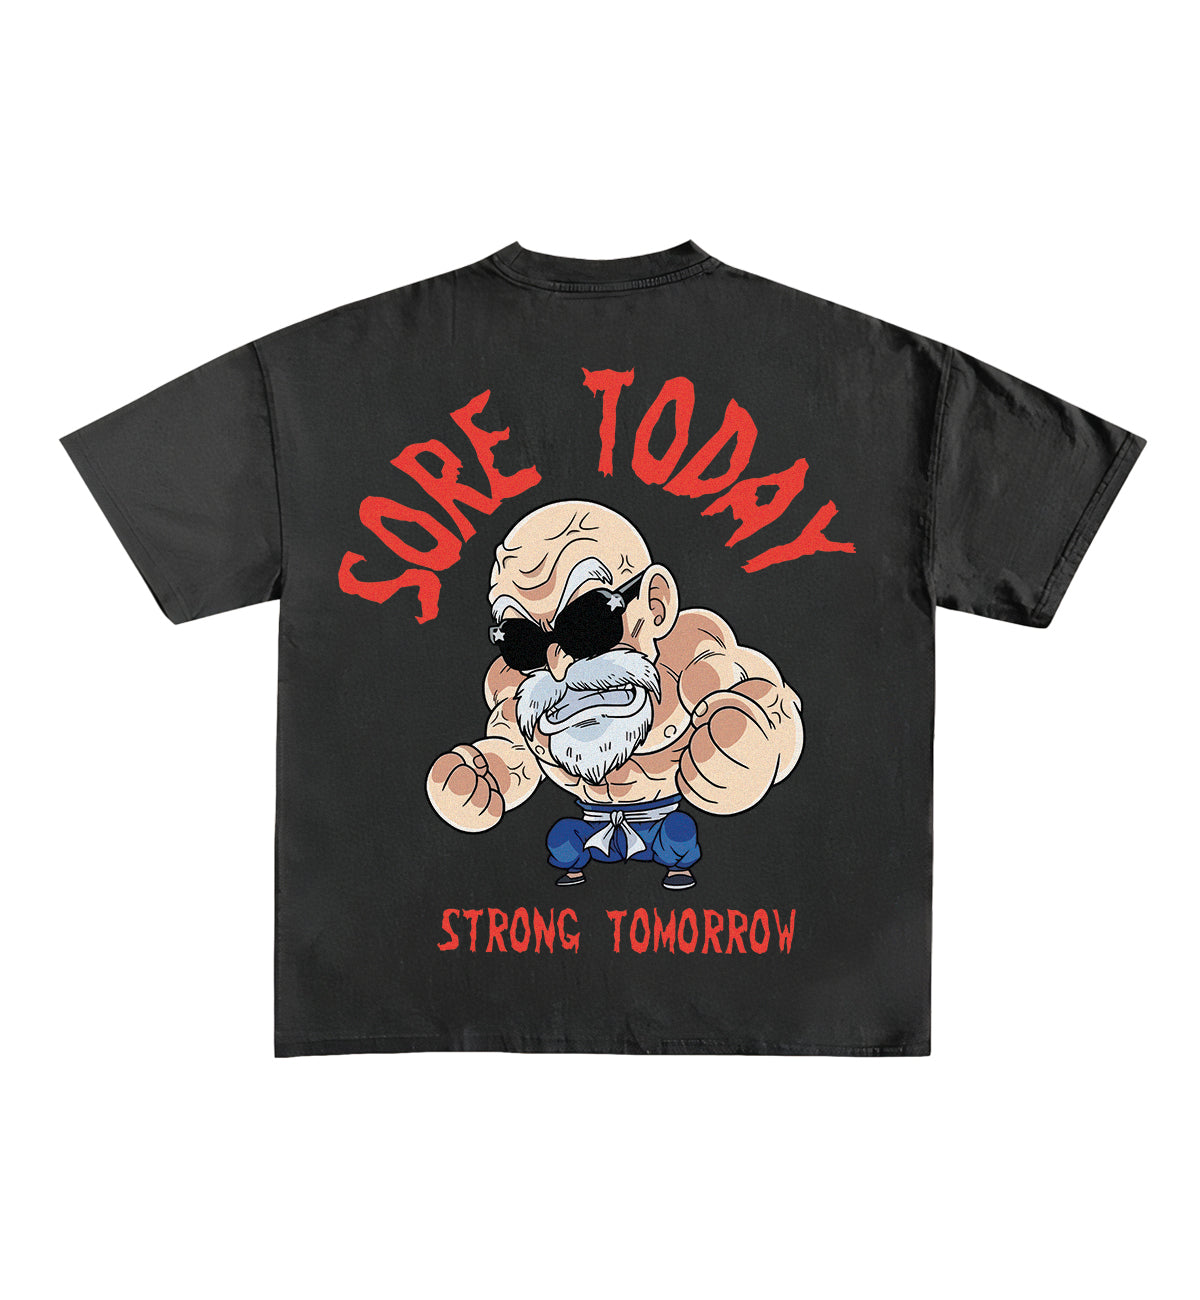 Sore Today Strong Tomorrow Designed Oversized Tee